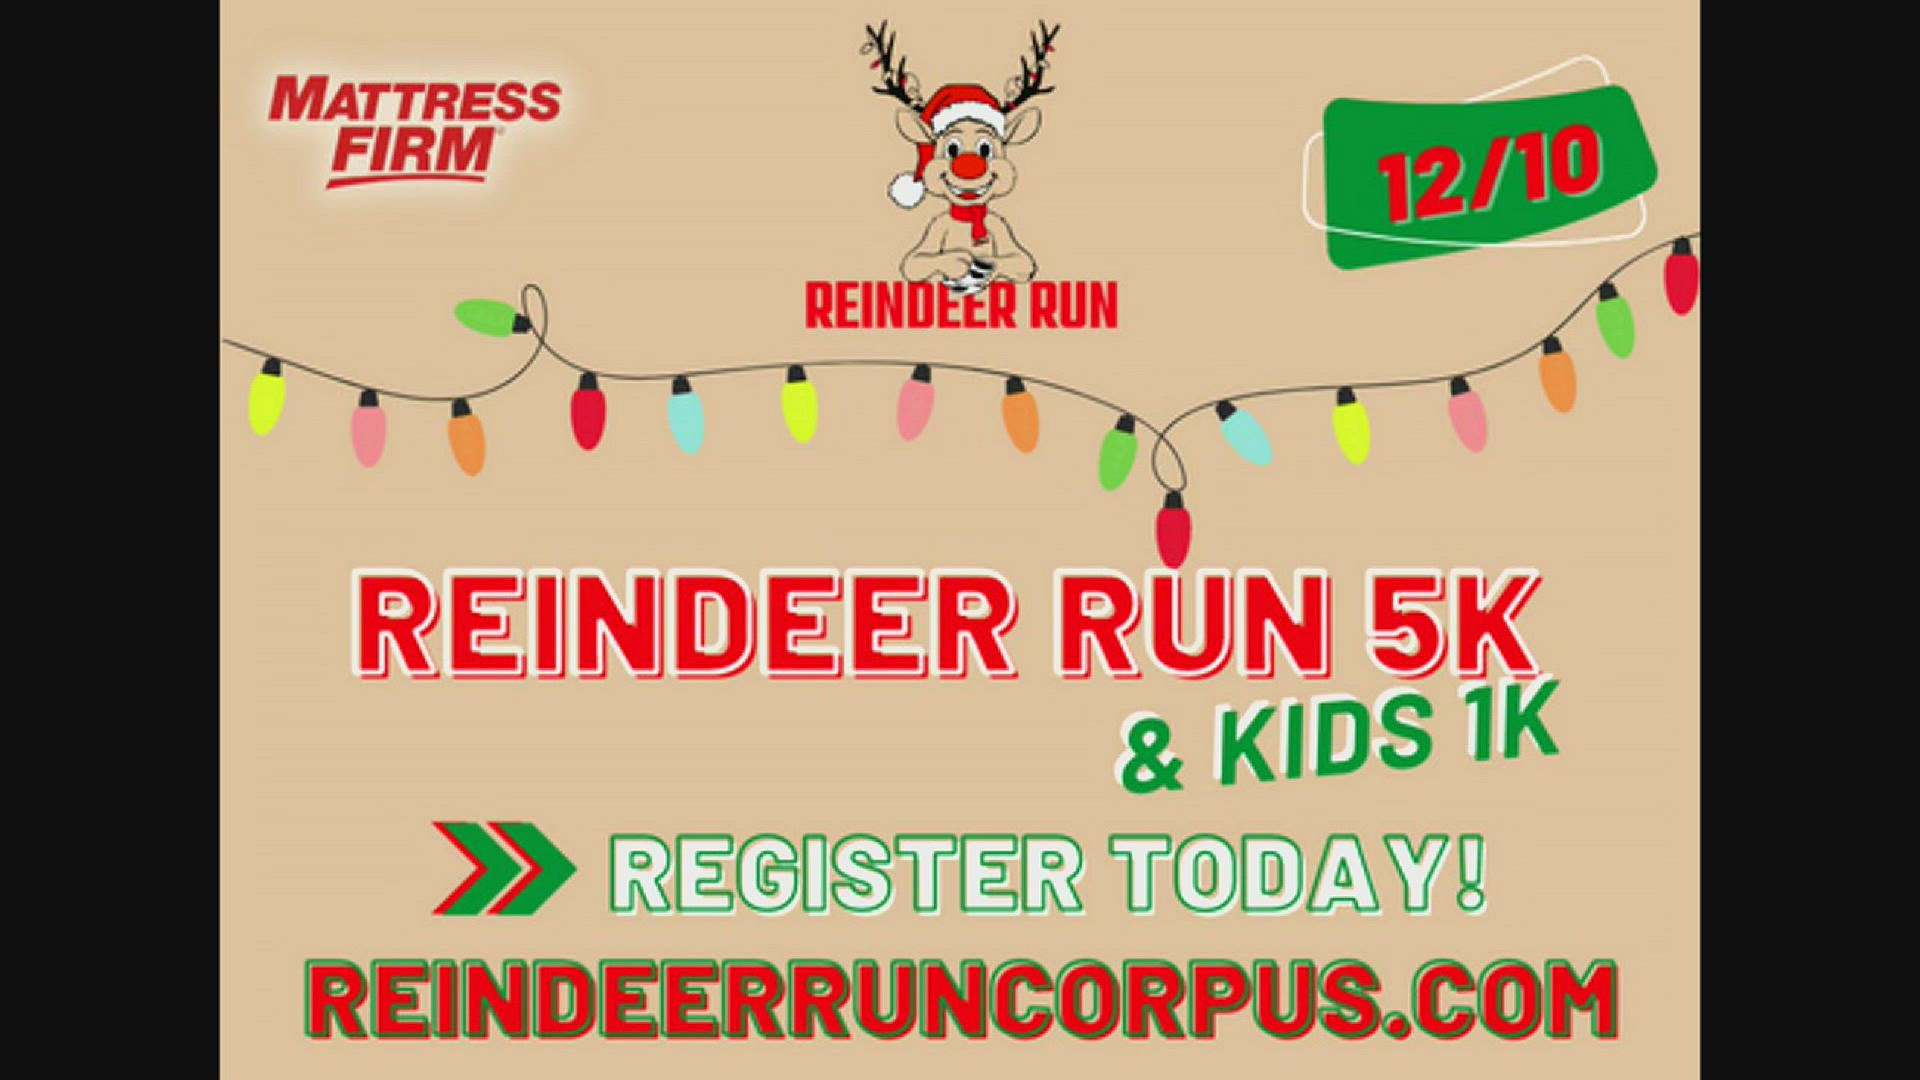 HOT Z95's Gino Flores joined us live to give us the rundown for the 11th annual Reindeer Run on Dec. 10th.